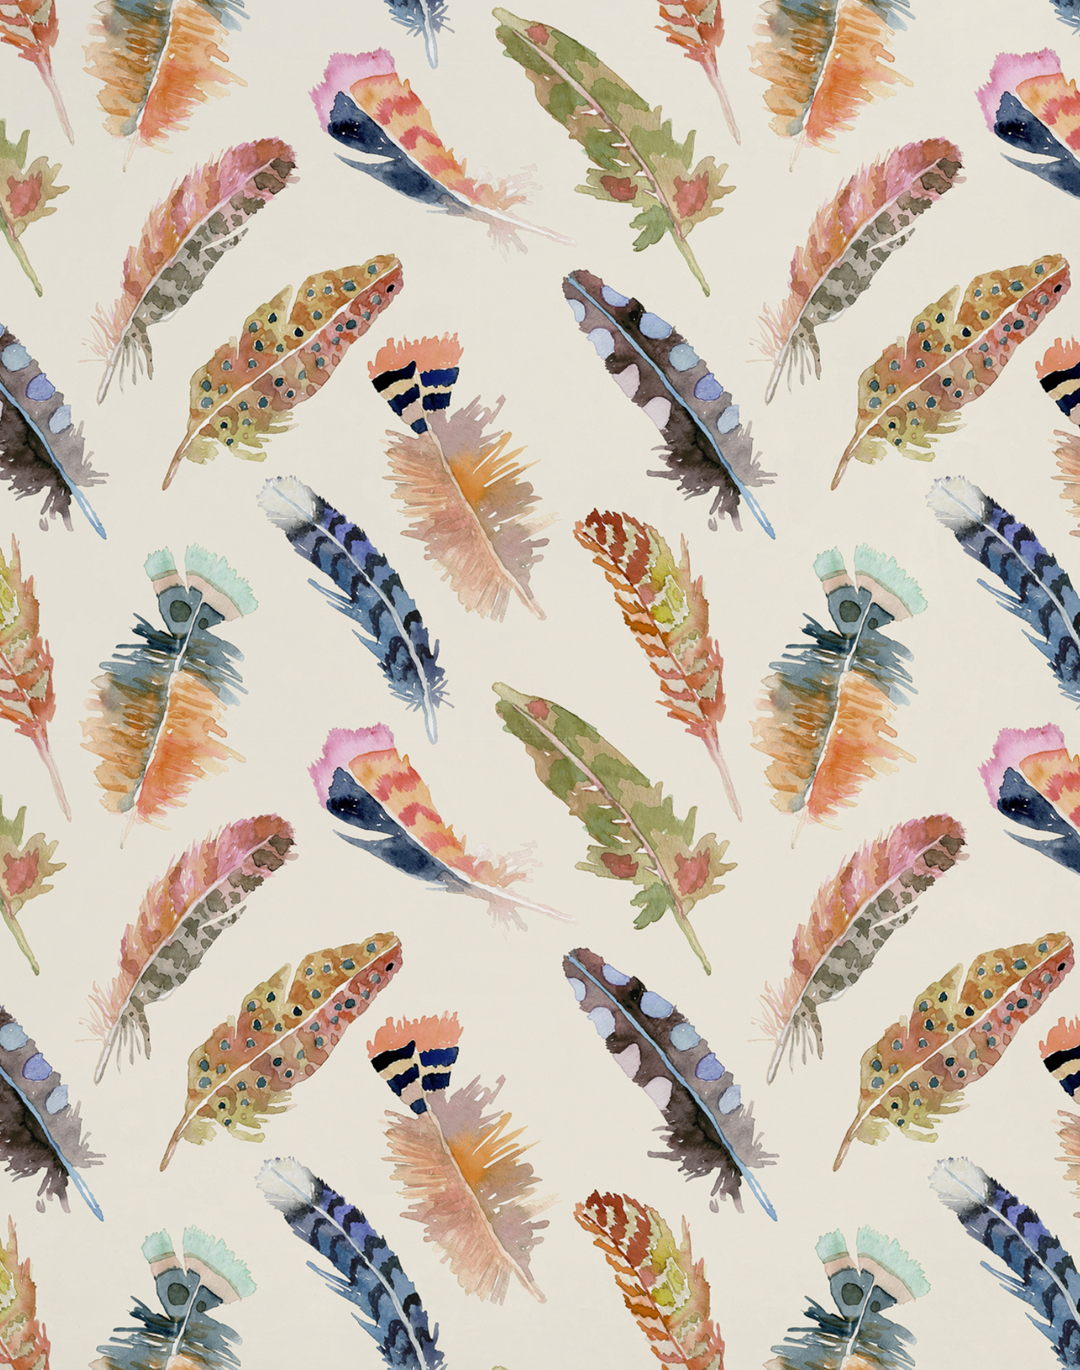 Natural Appeal: The Striking Display Of Patterned “Pheasant” Feathers